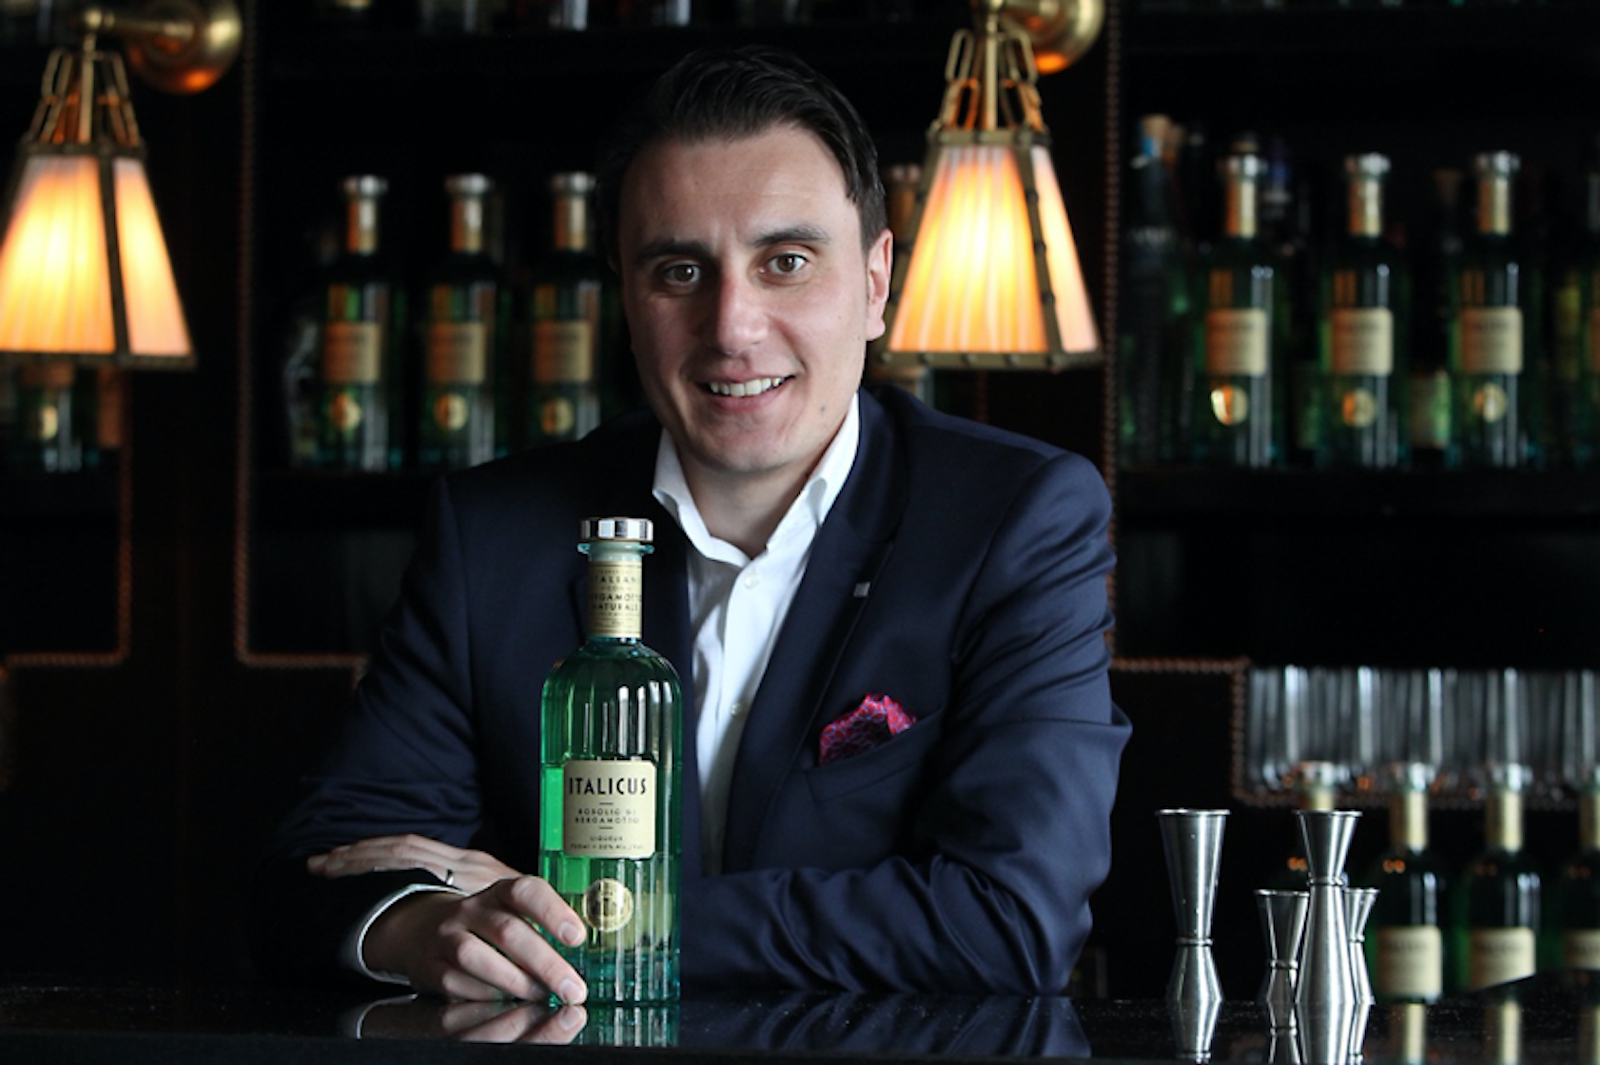 giuseppe gallo, founder and ceo of italicus